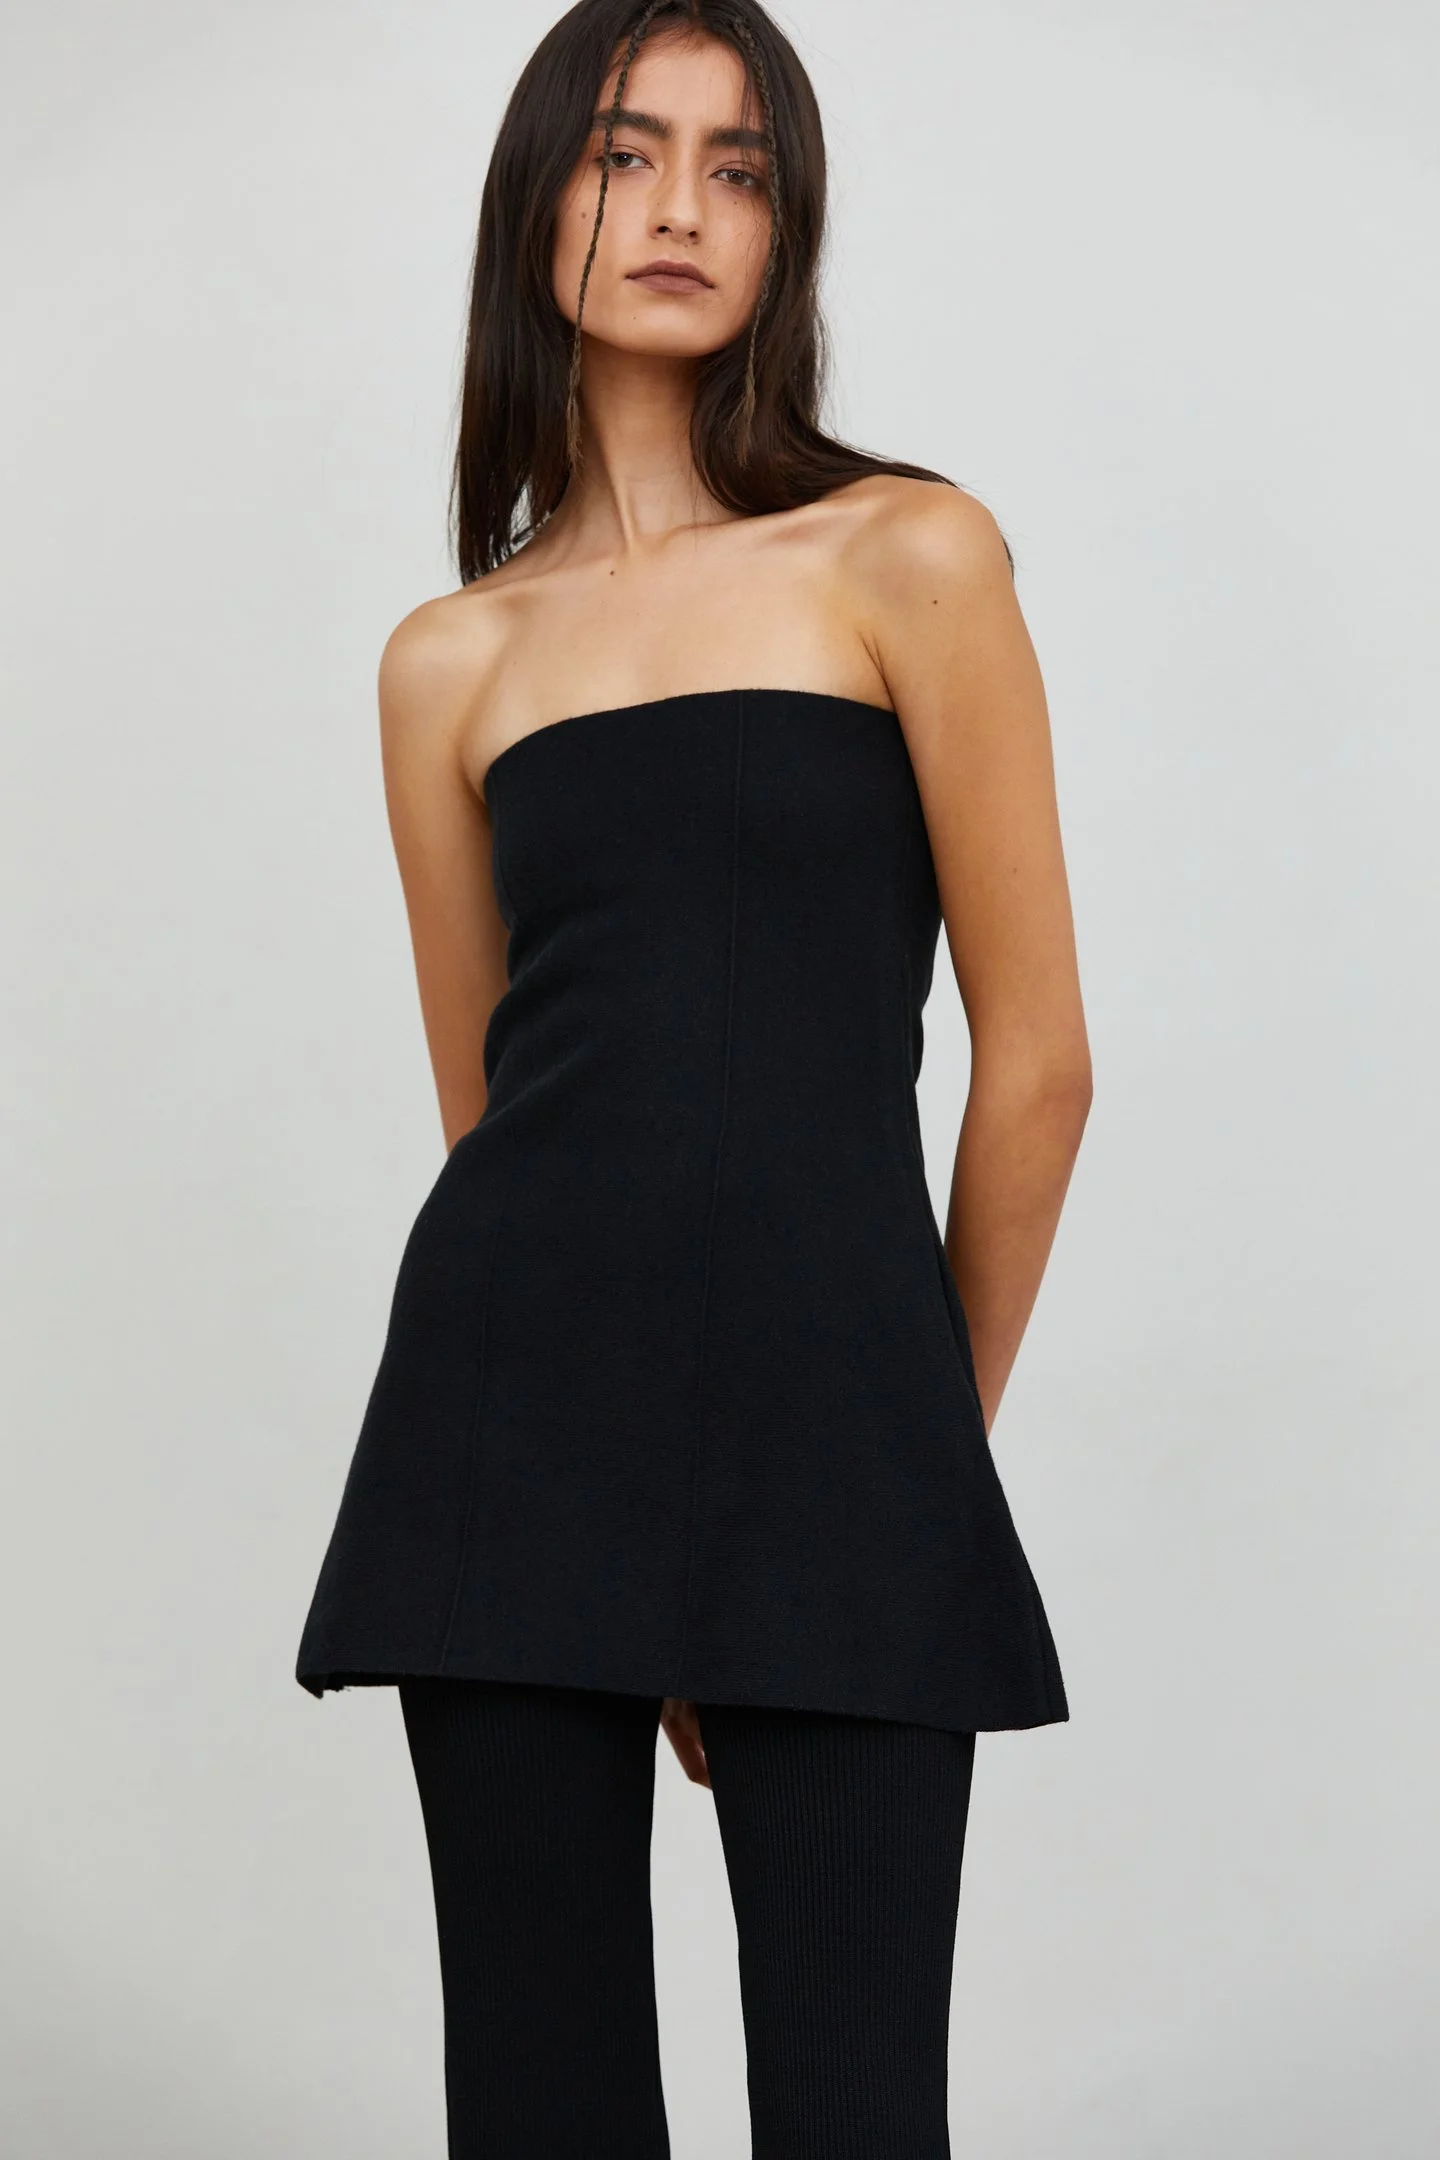 The Source Unknown + Strapless Bustier Knit Top